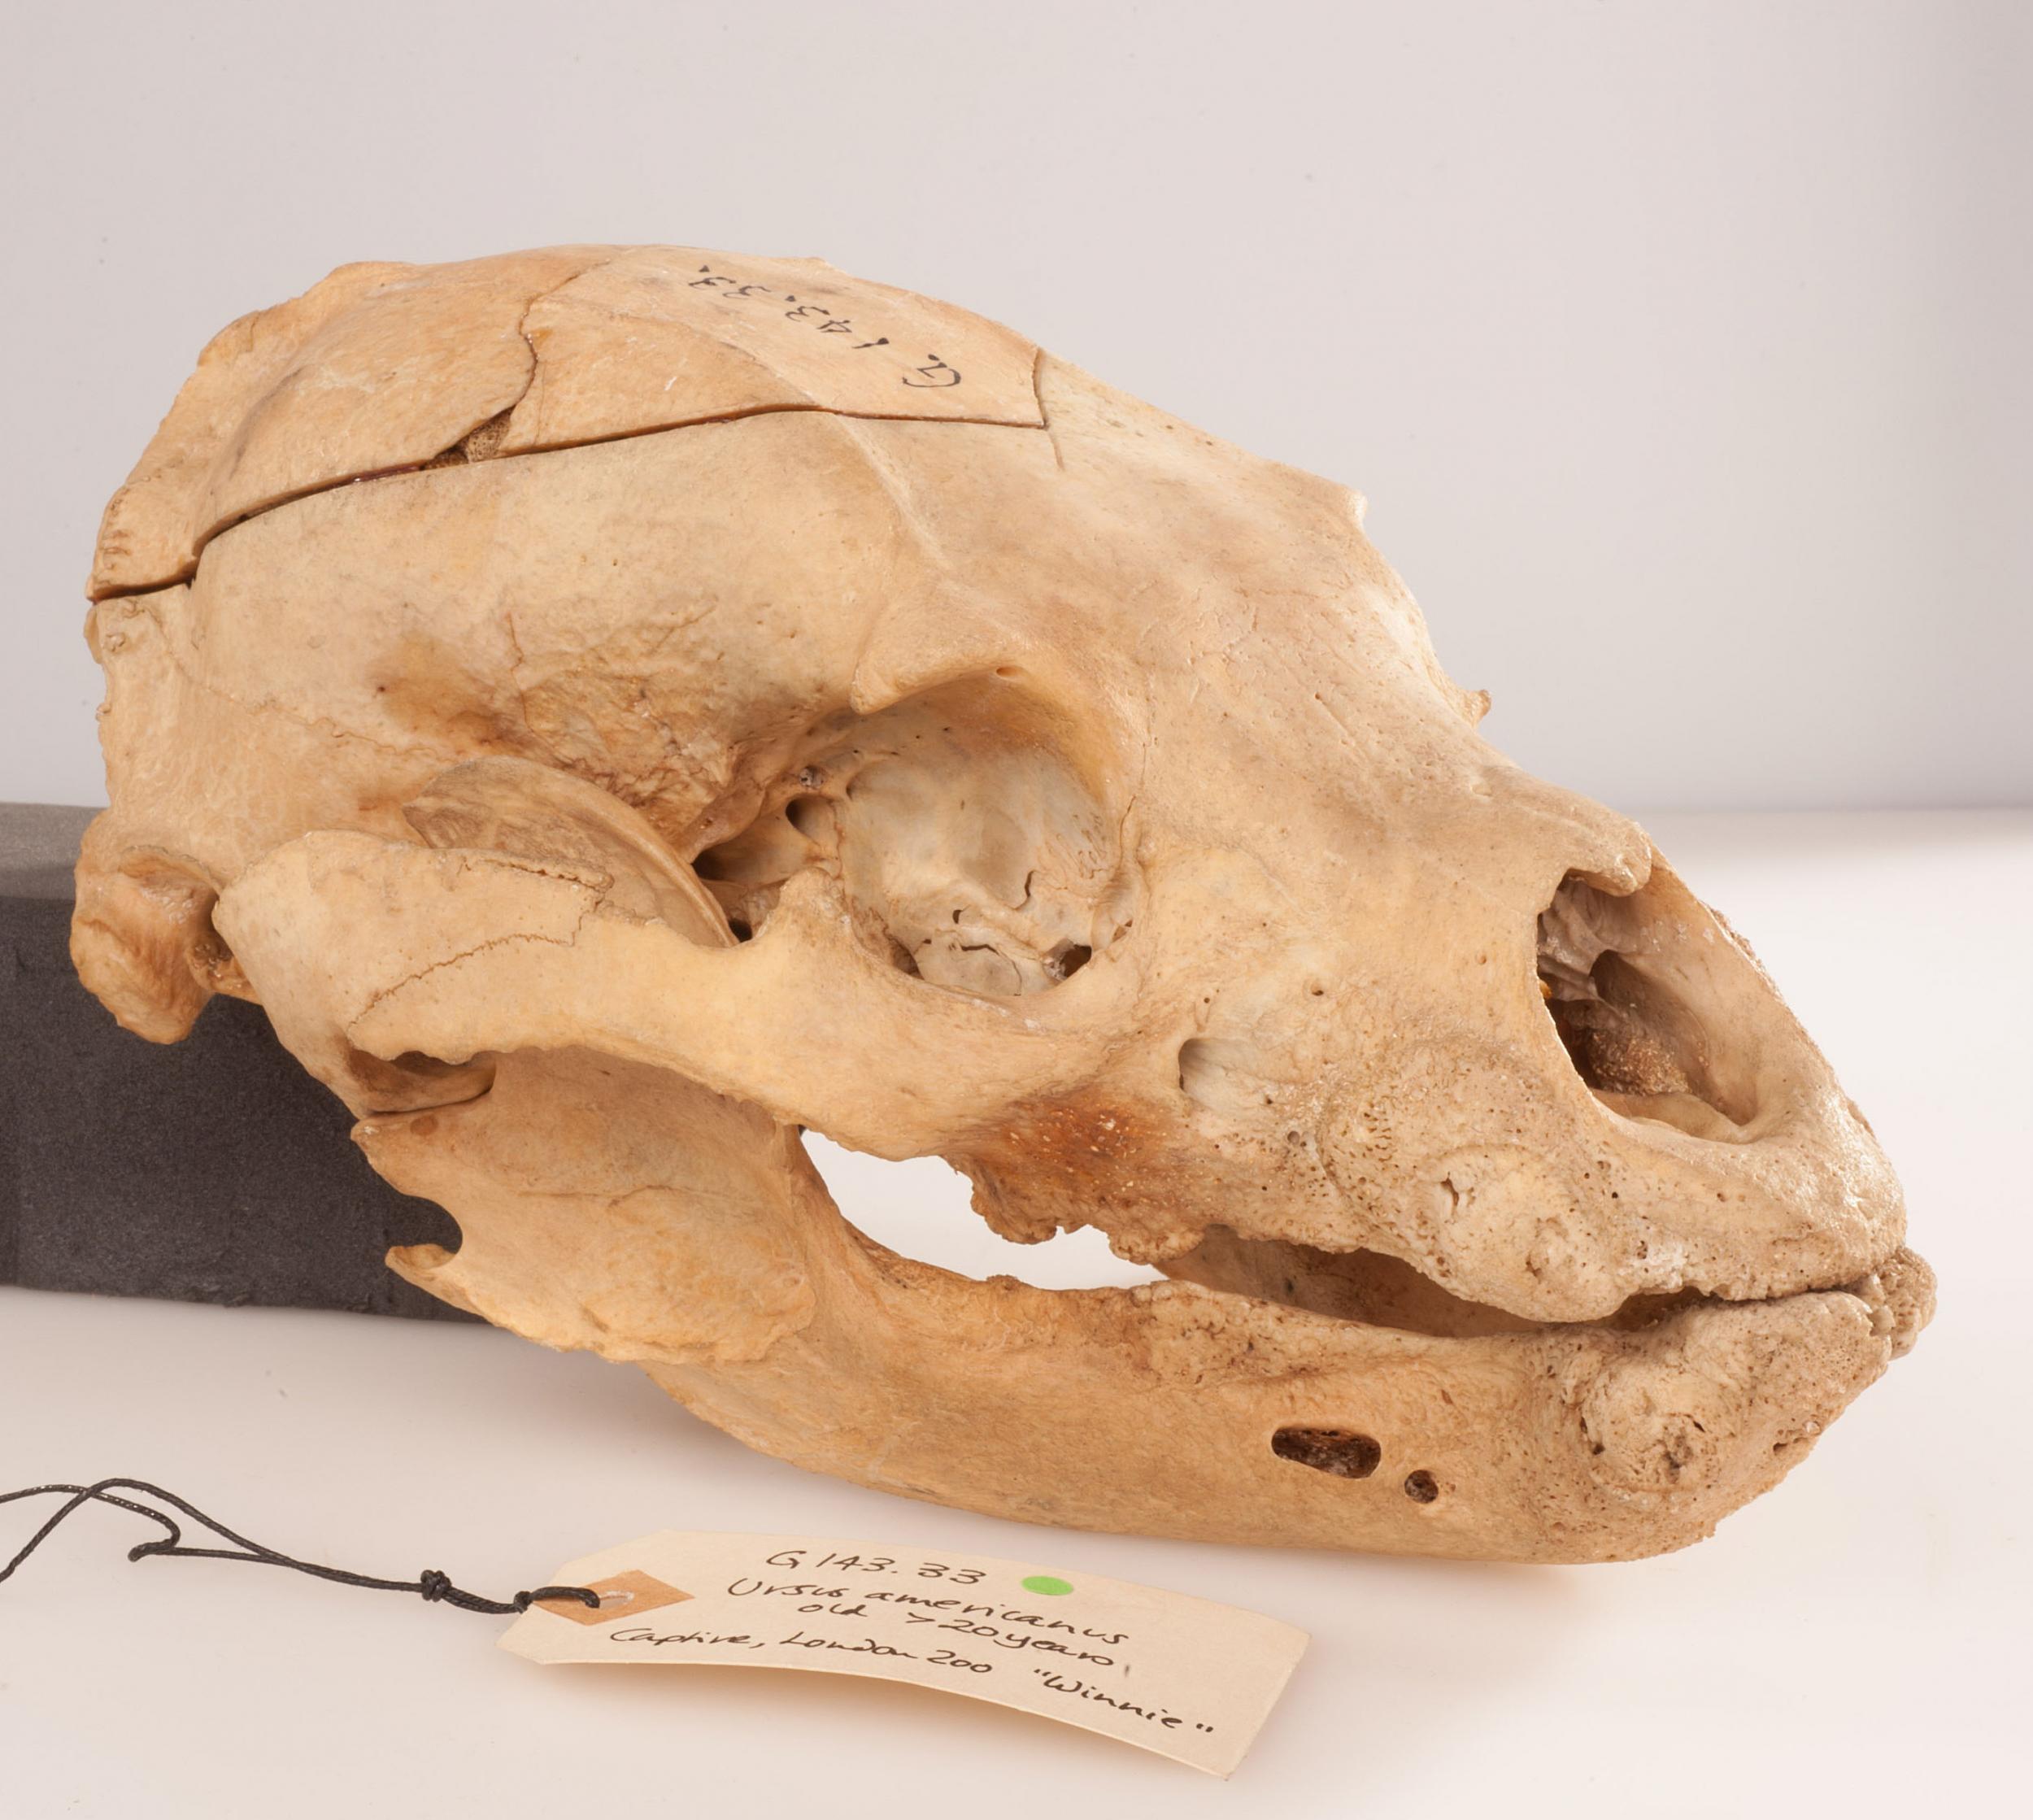 The skull of Winnie the black bear who inspired Winnie the Pooh, on display at the Hunterian Museum in London